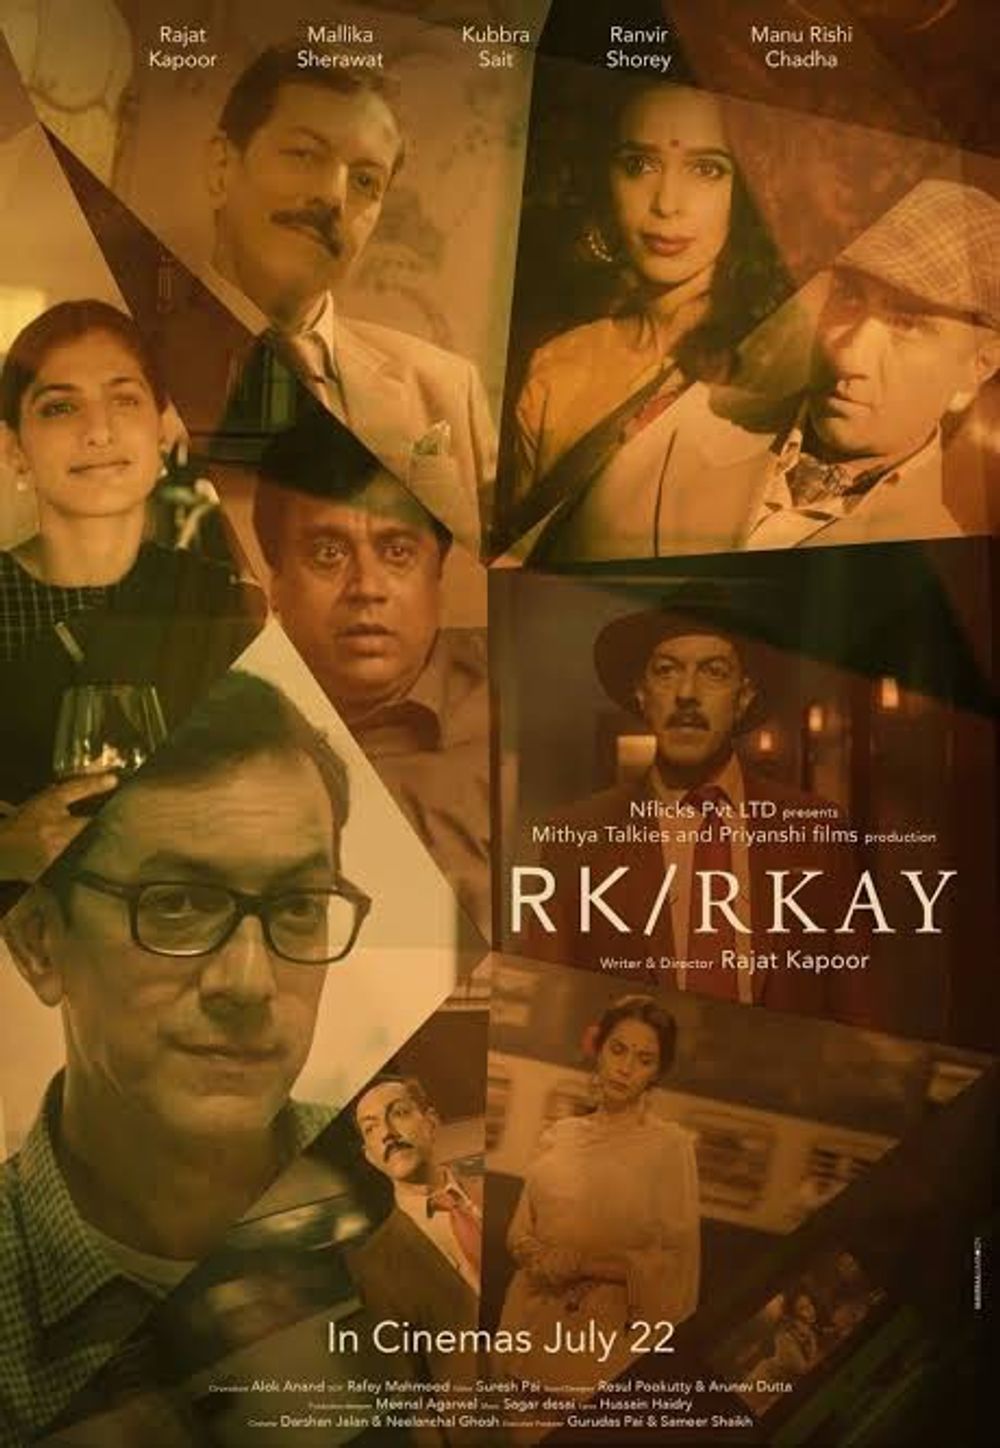 RK/RKay Movie (2022) Cast & Crew, Release Date, Story, Review, Poster, Trailer, Budget, Collection 